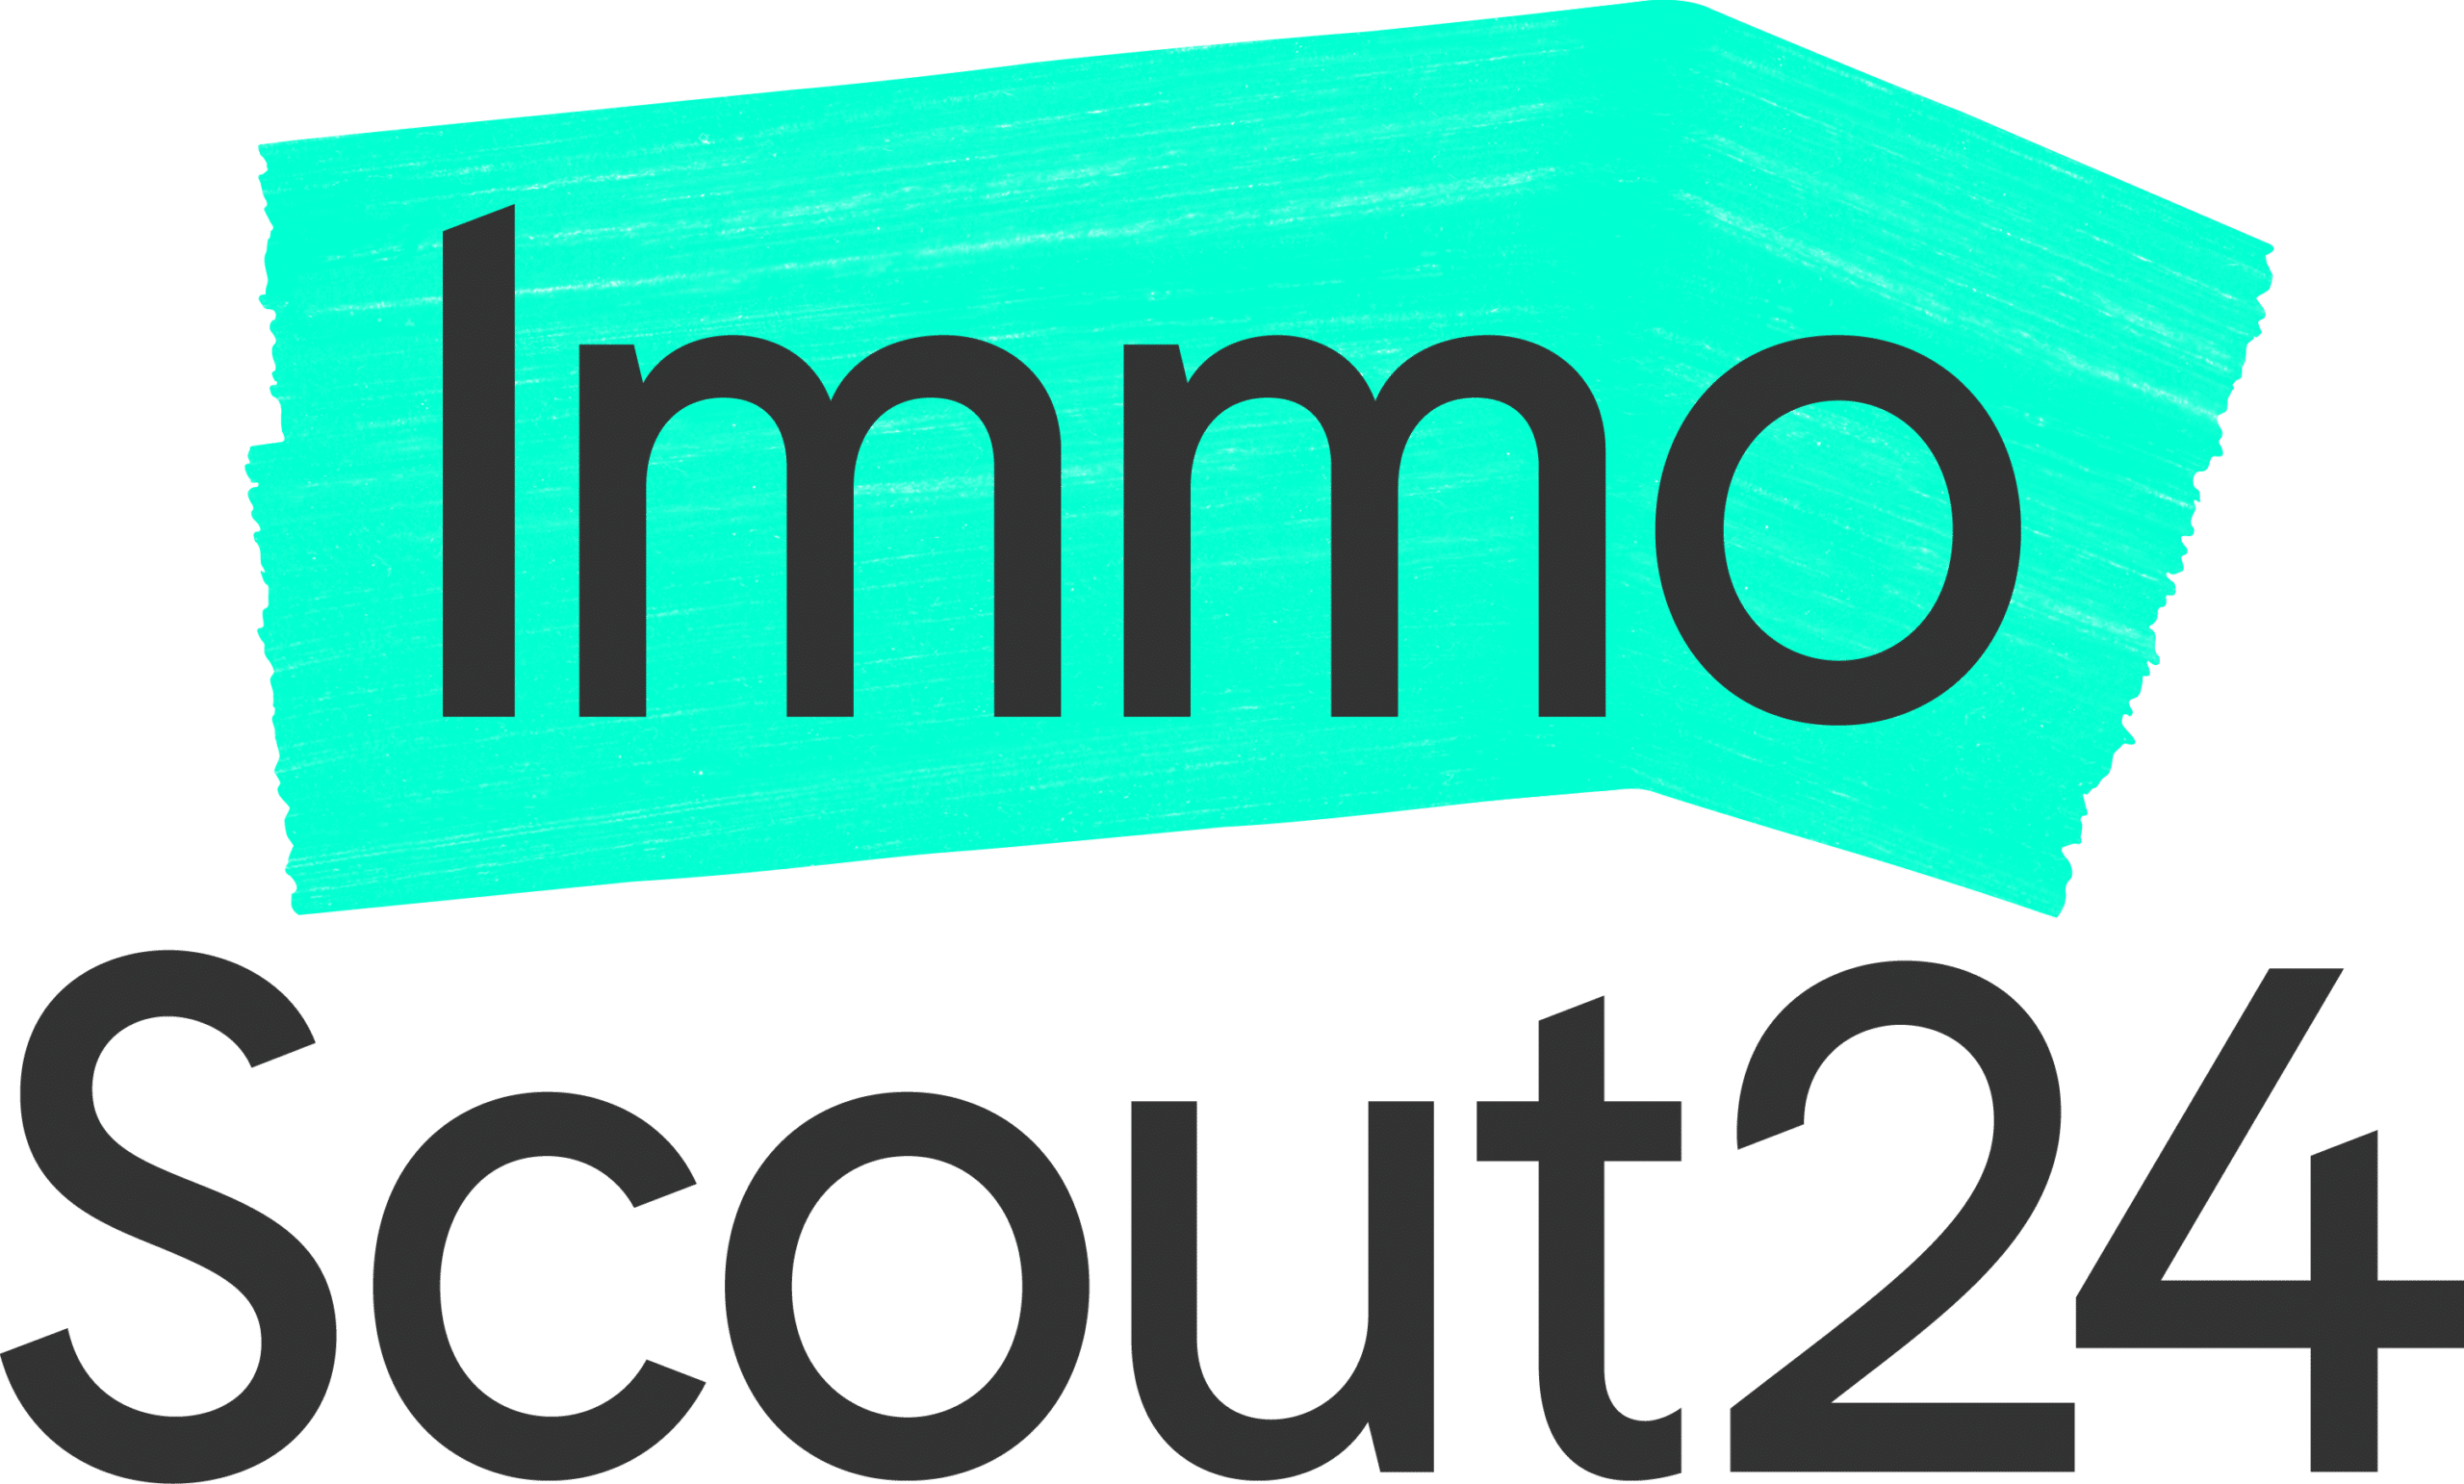 immoscout24-logo.png
				